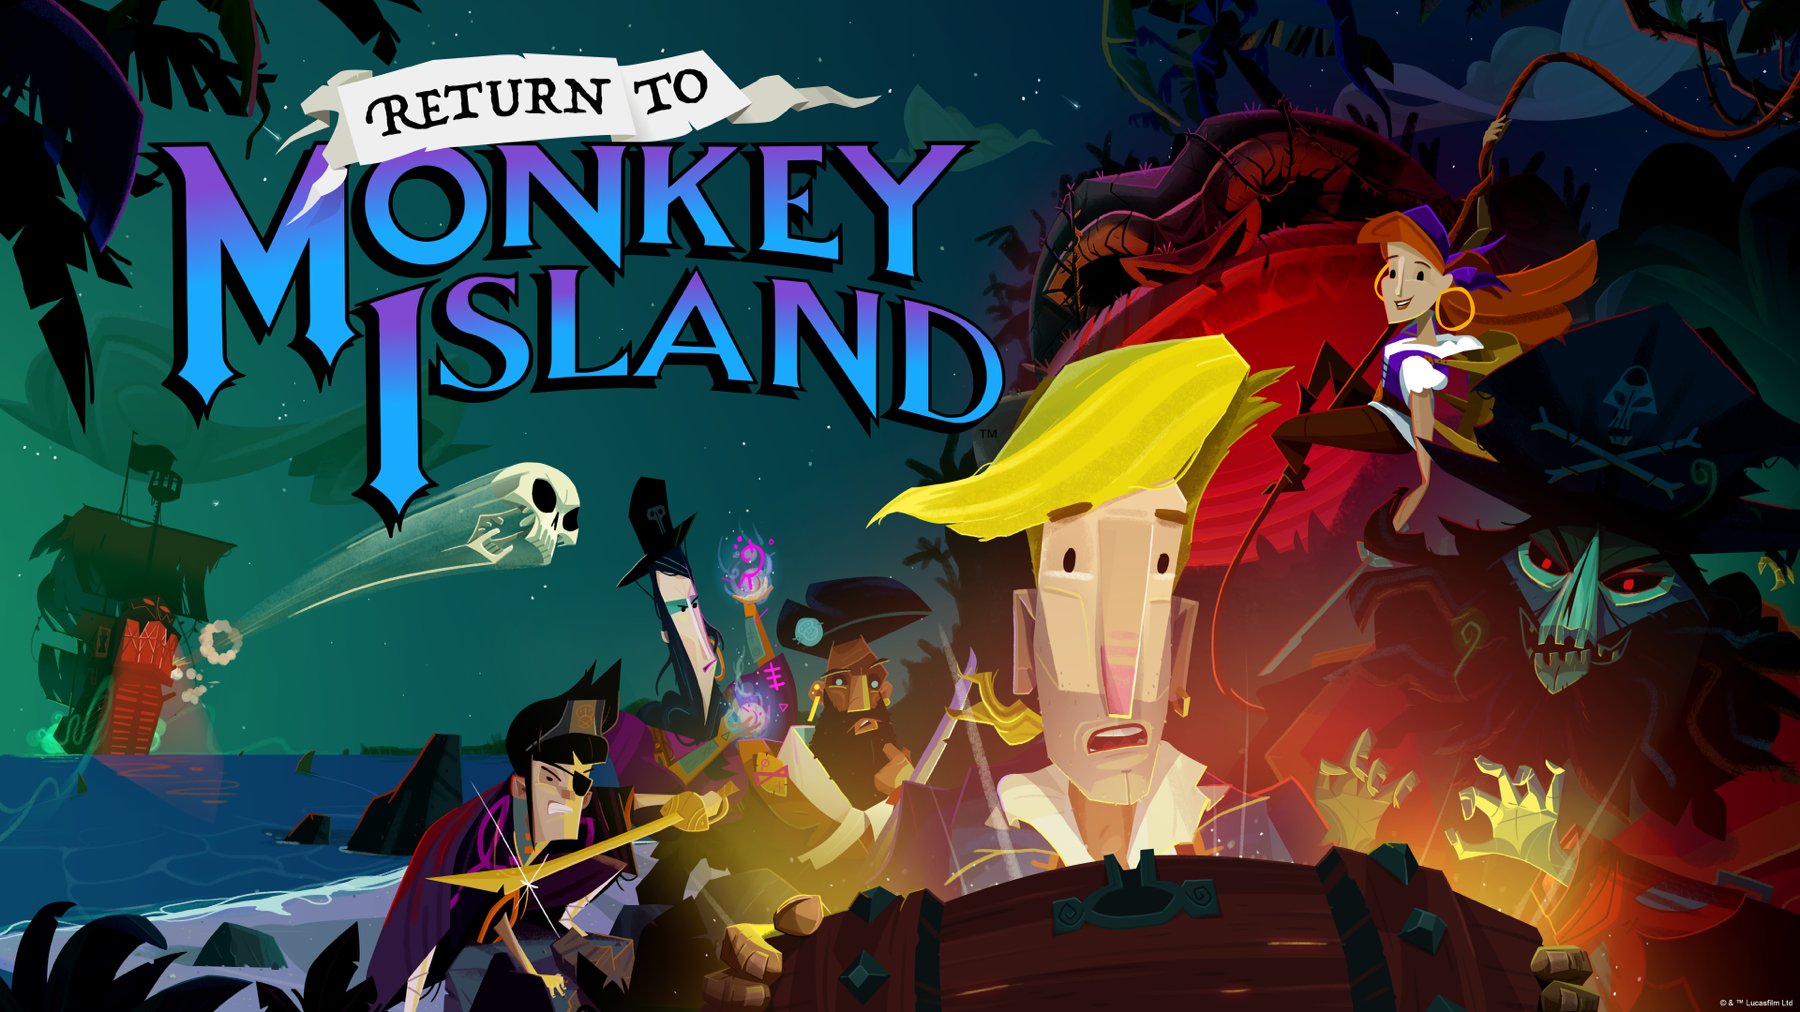 Before Return to Monkey Island: 85% off Monkey Island Collection on Steam today only